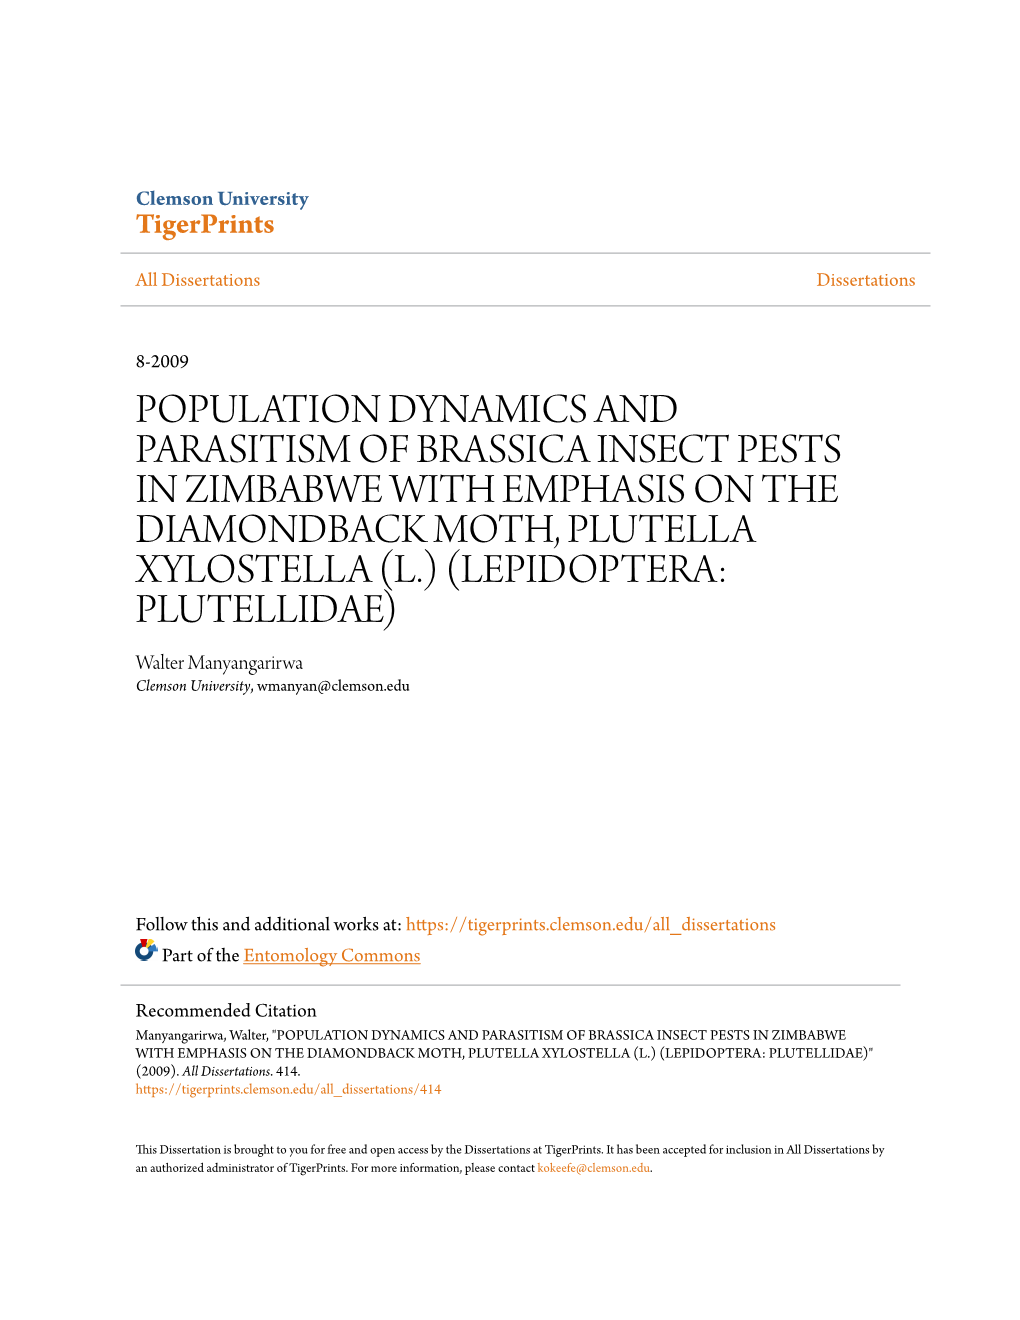 Population Dynamics and Parasitism of Brassica Insect Pests in Zimbabwe with Emphasis on the Diamondback Moth, Plutella Xylostel